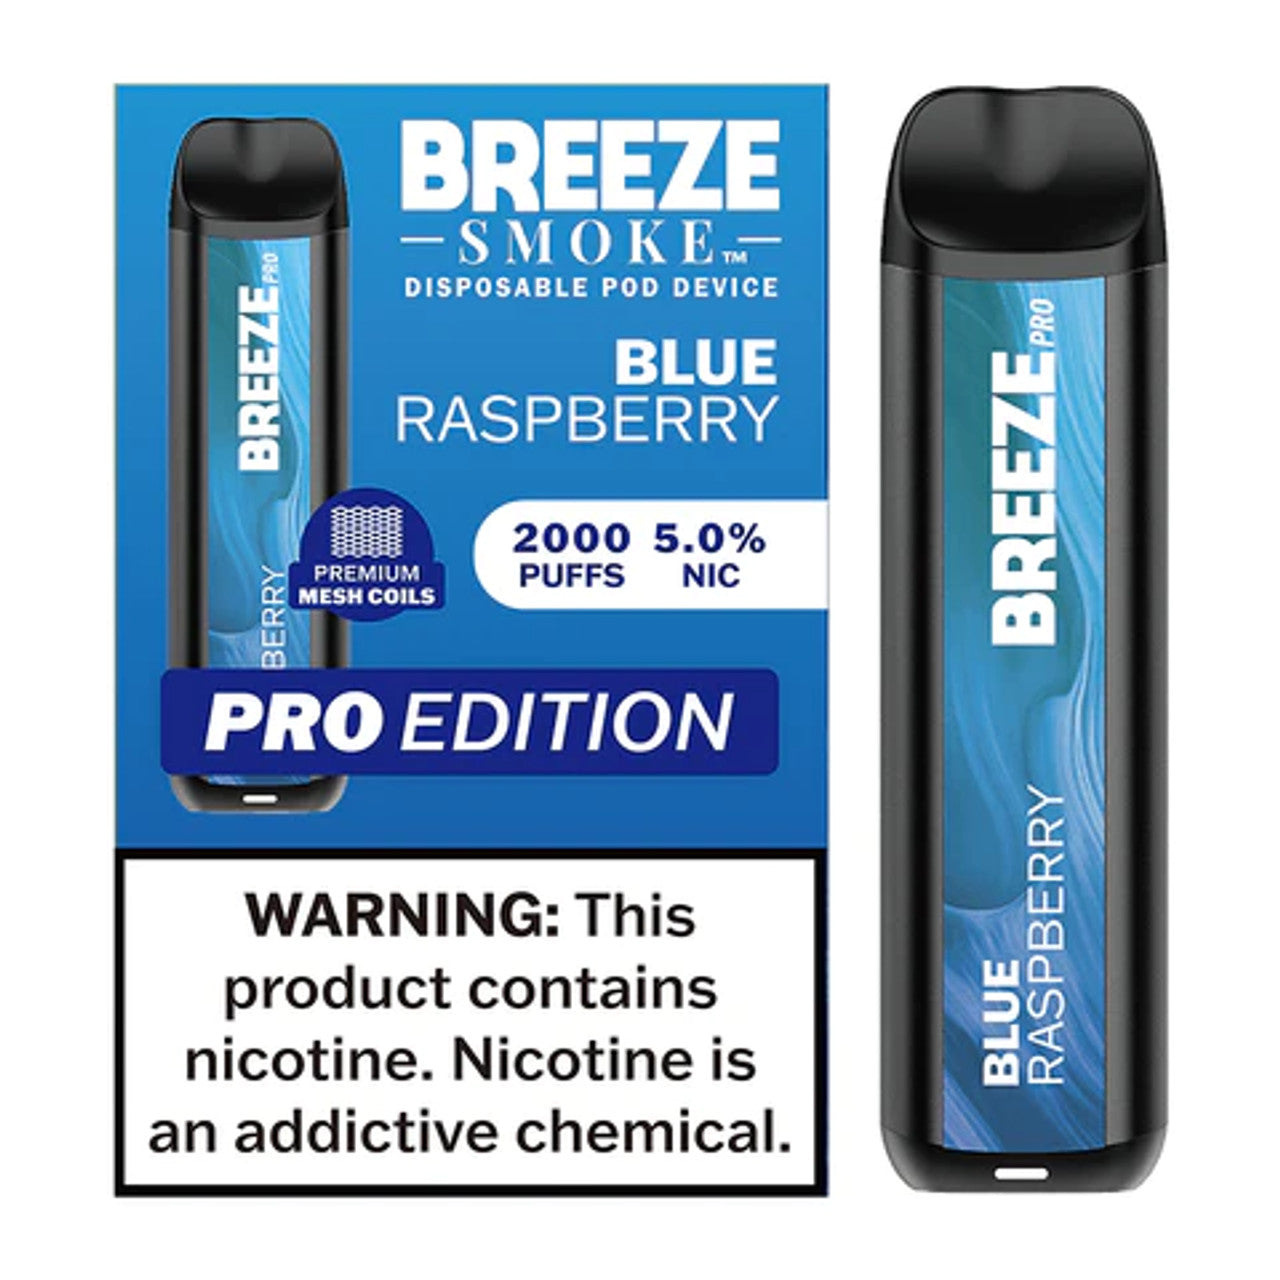 BREEZE PRO EDITION 2000 PUFFS DISPOSABLE 5% Nicotine